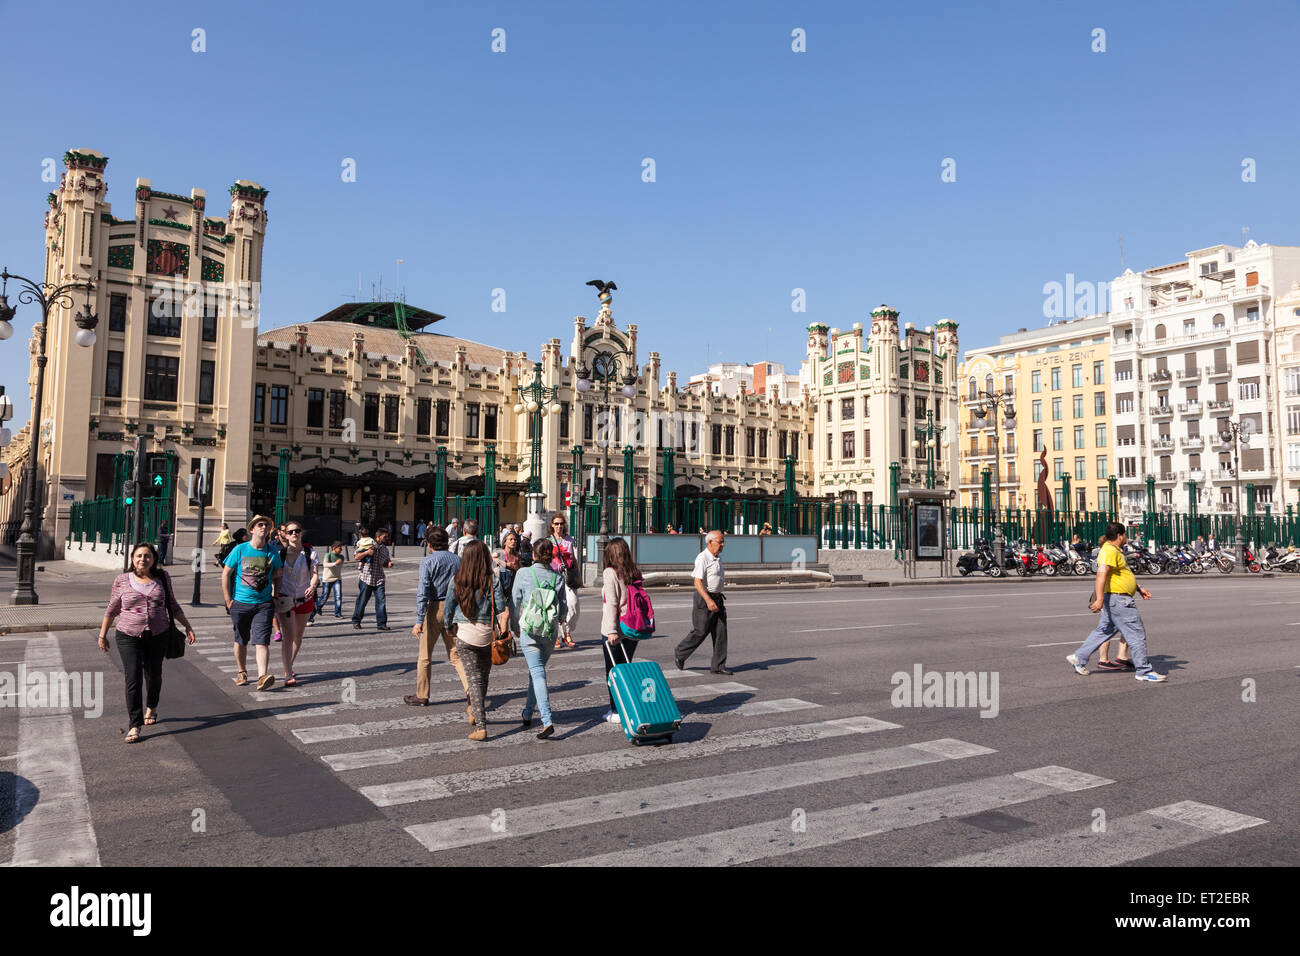 The North Train Station in the city of Valencia, Spain Stock Photo